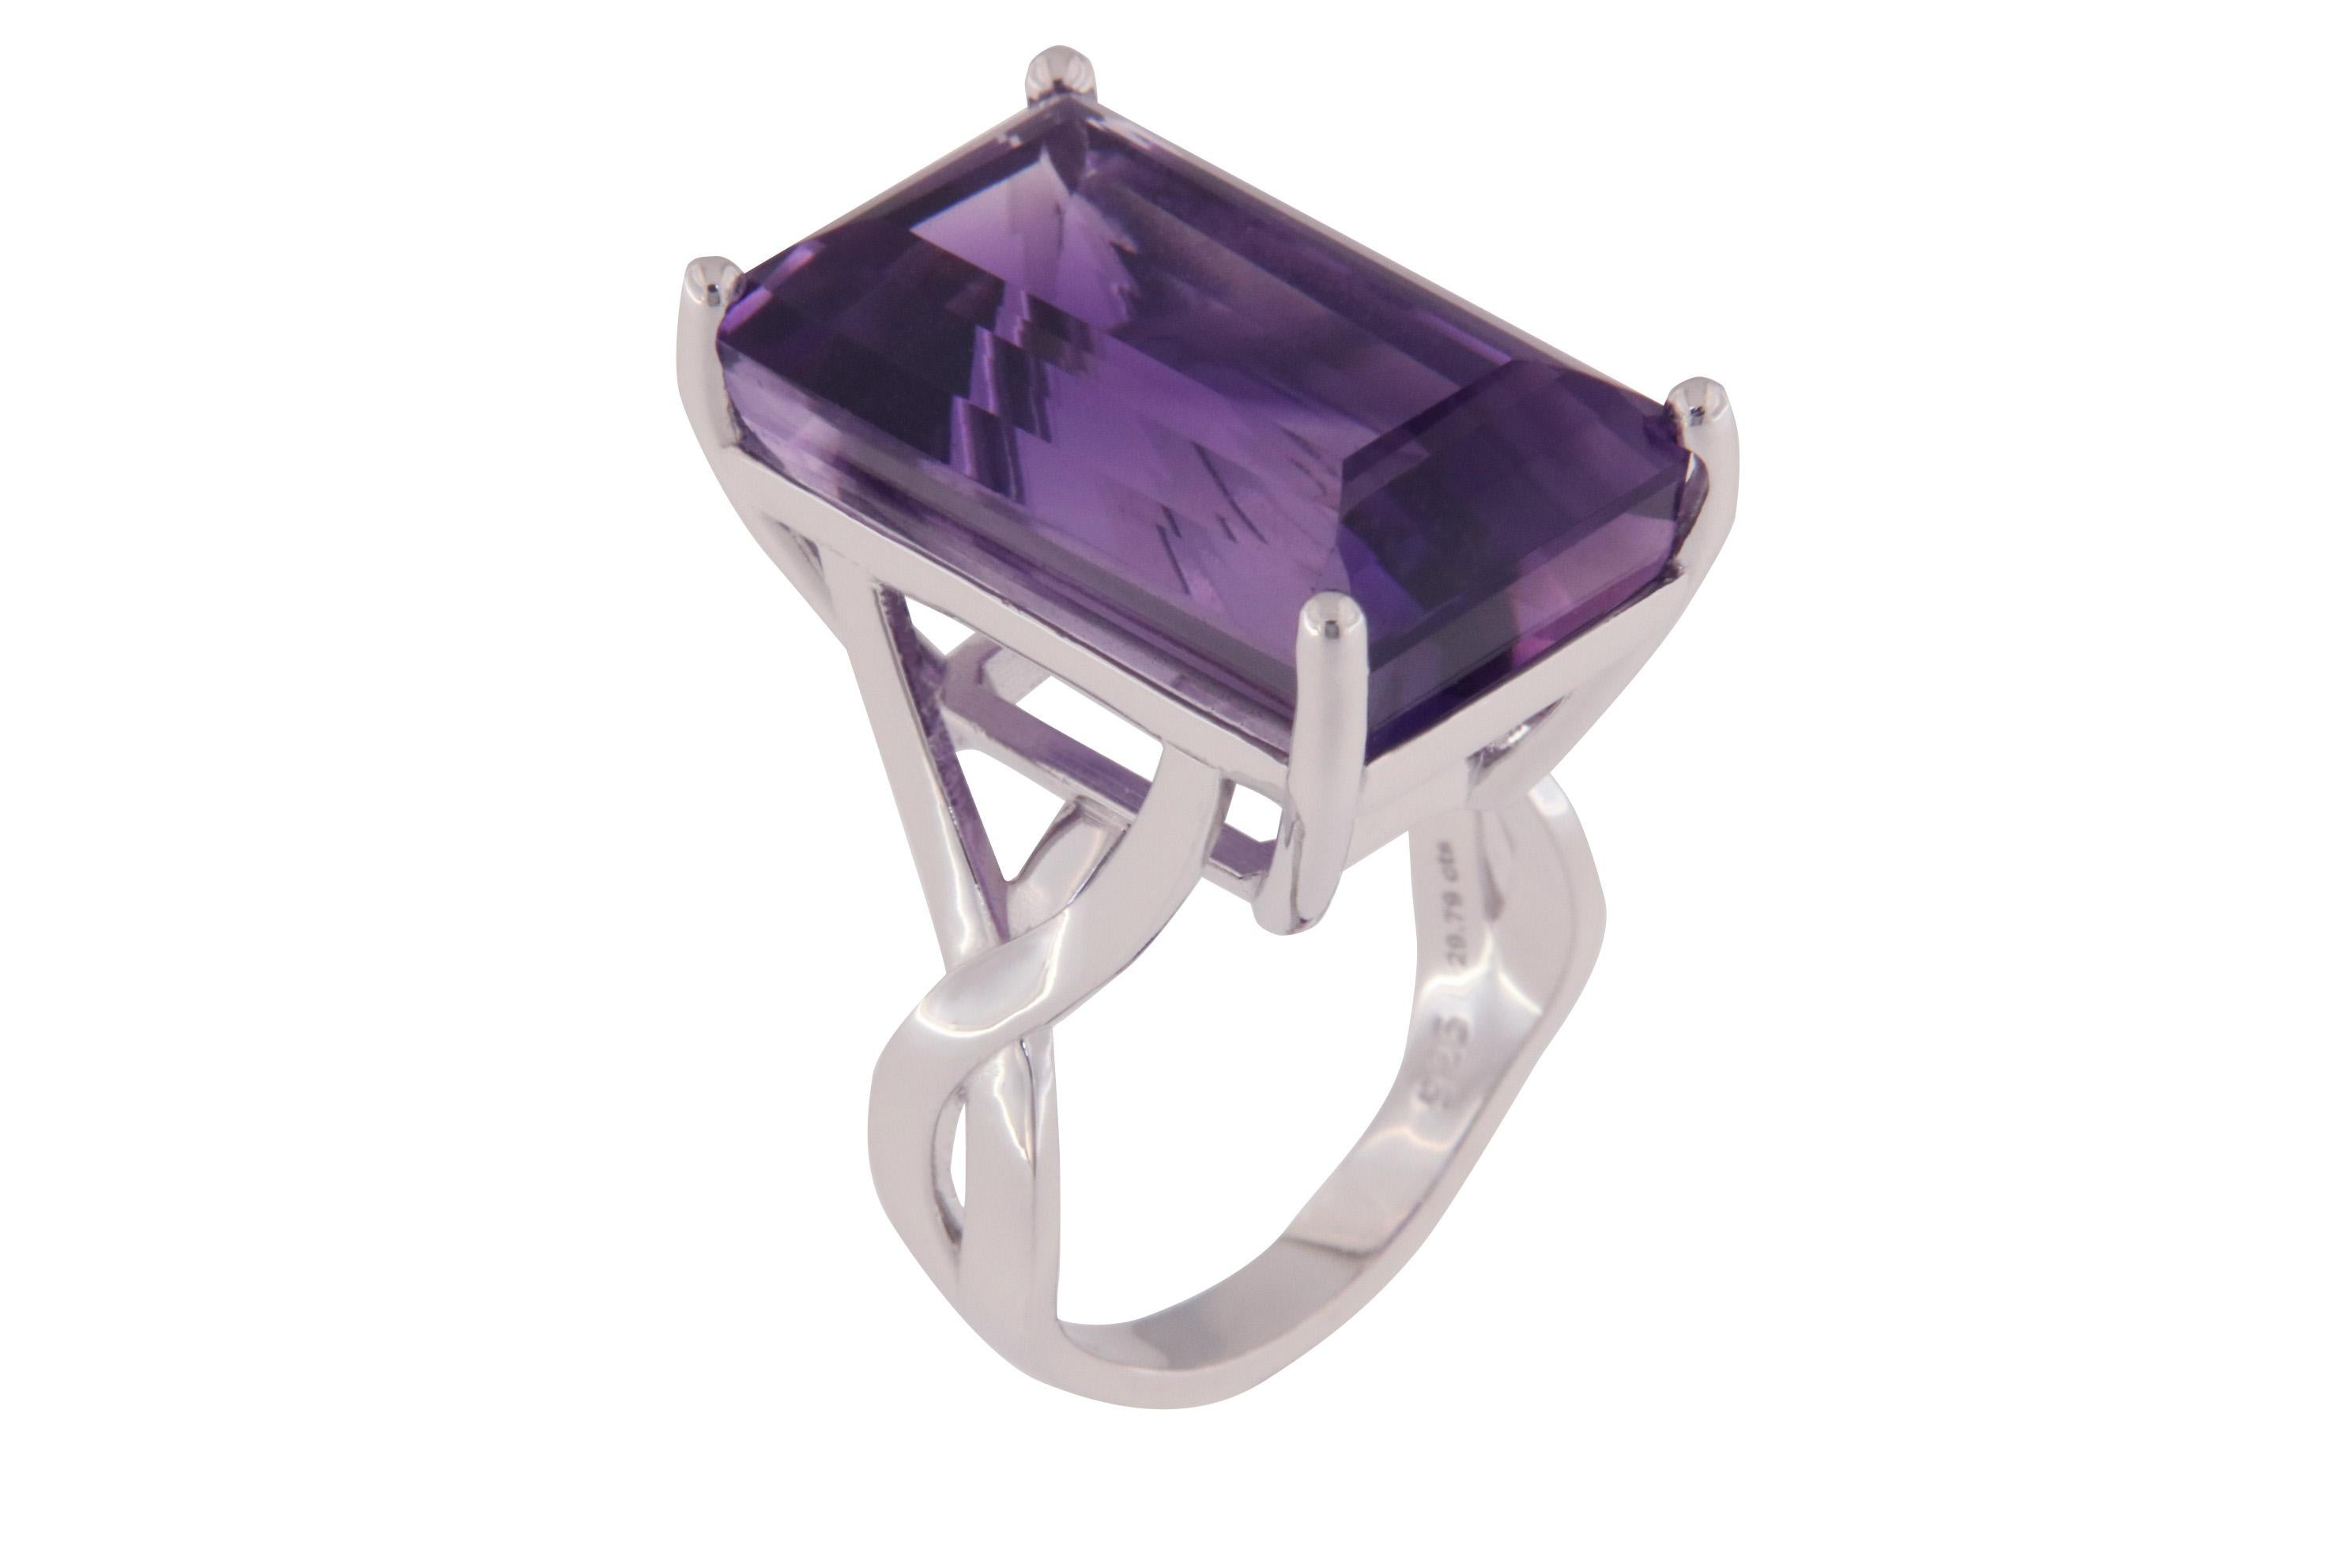 Orloff of Denmark; Amethyst Ring Fashioned out of 925 Sterling Silver.

Presenting a gorgeous amethyst ring, set in polished 925 sterling silver. The centerpiece is a beautifully faceted amethyst with a deep purple color that sparkles in the light.